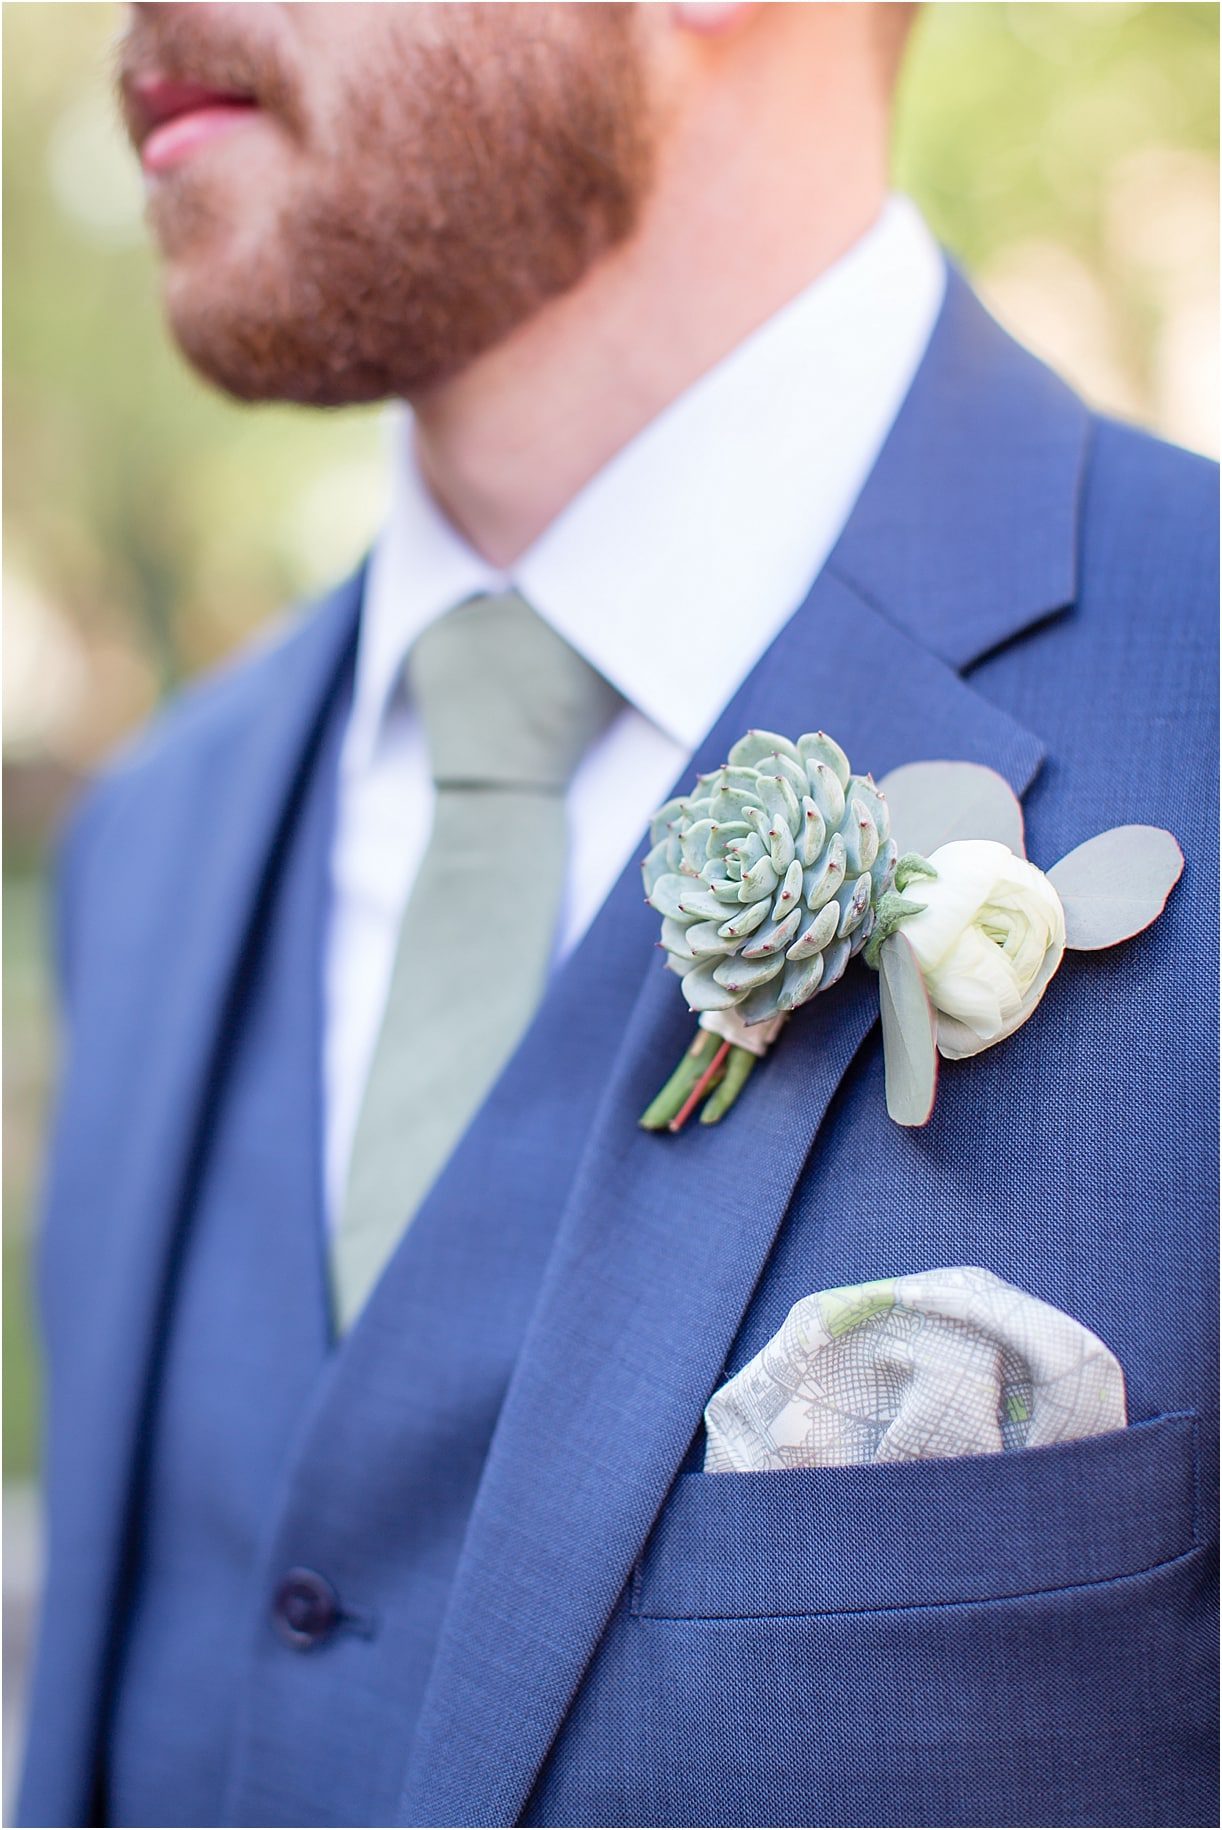 Sophisticated Richmond Wedding in Virginia as seen on Hill City Bride by Melissa Desjardins Photography Succulent Bout